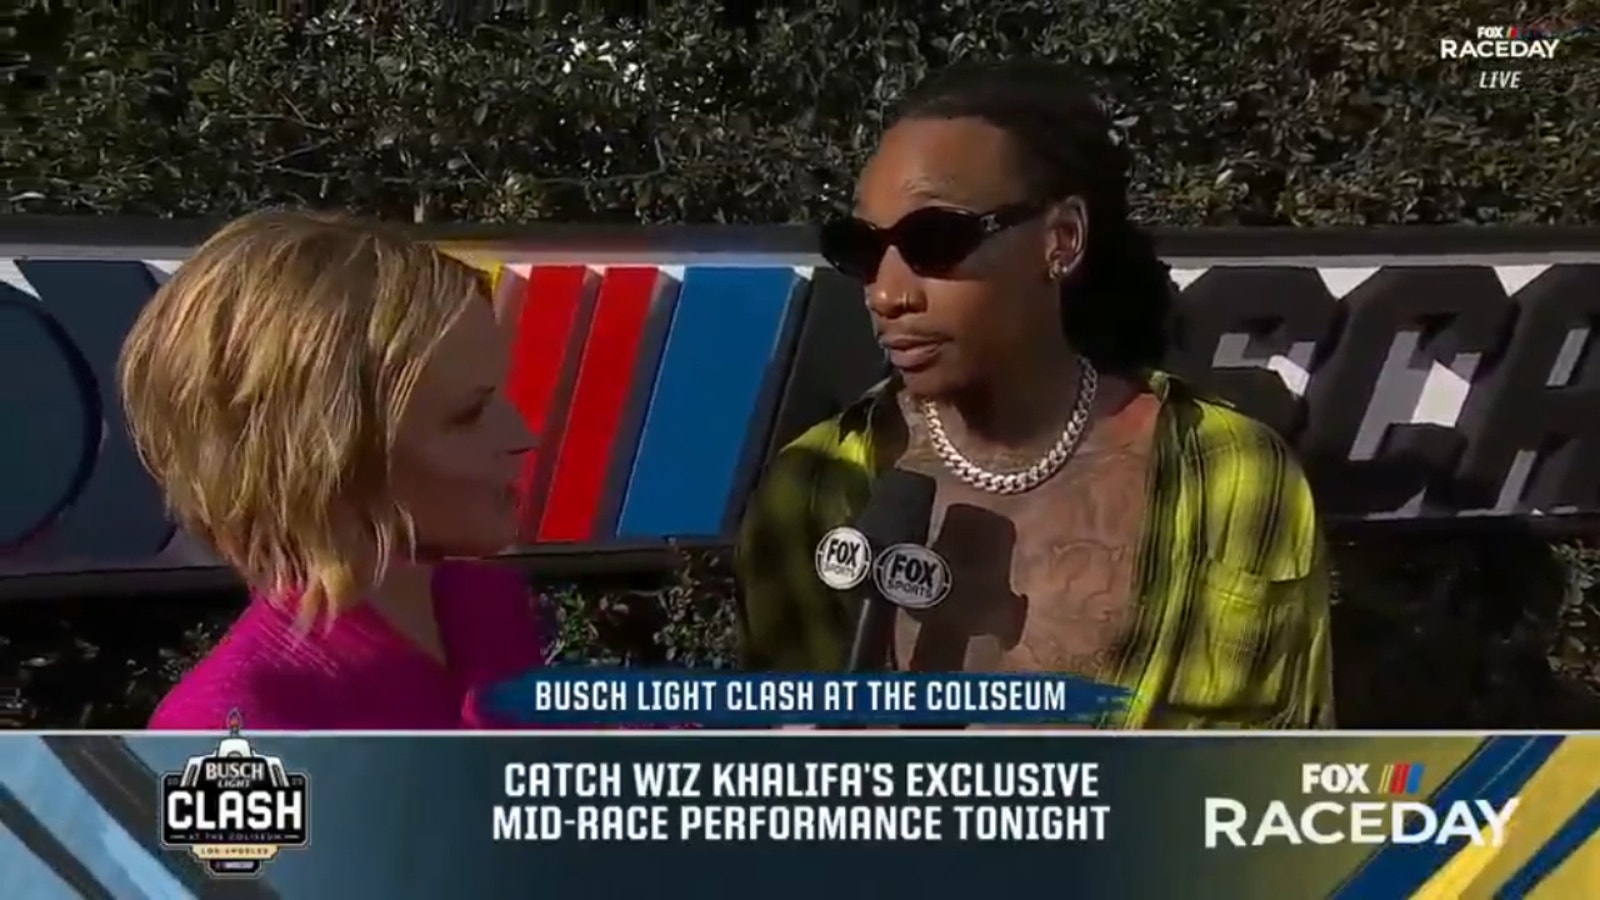 Wiz Khalifa on his mid-race performance at NASCAR's Clash at the Coliseum